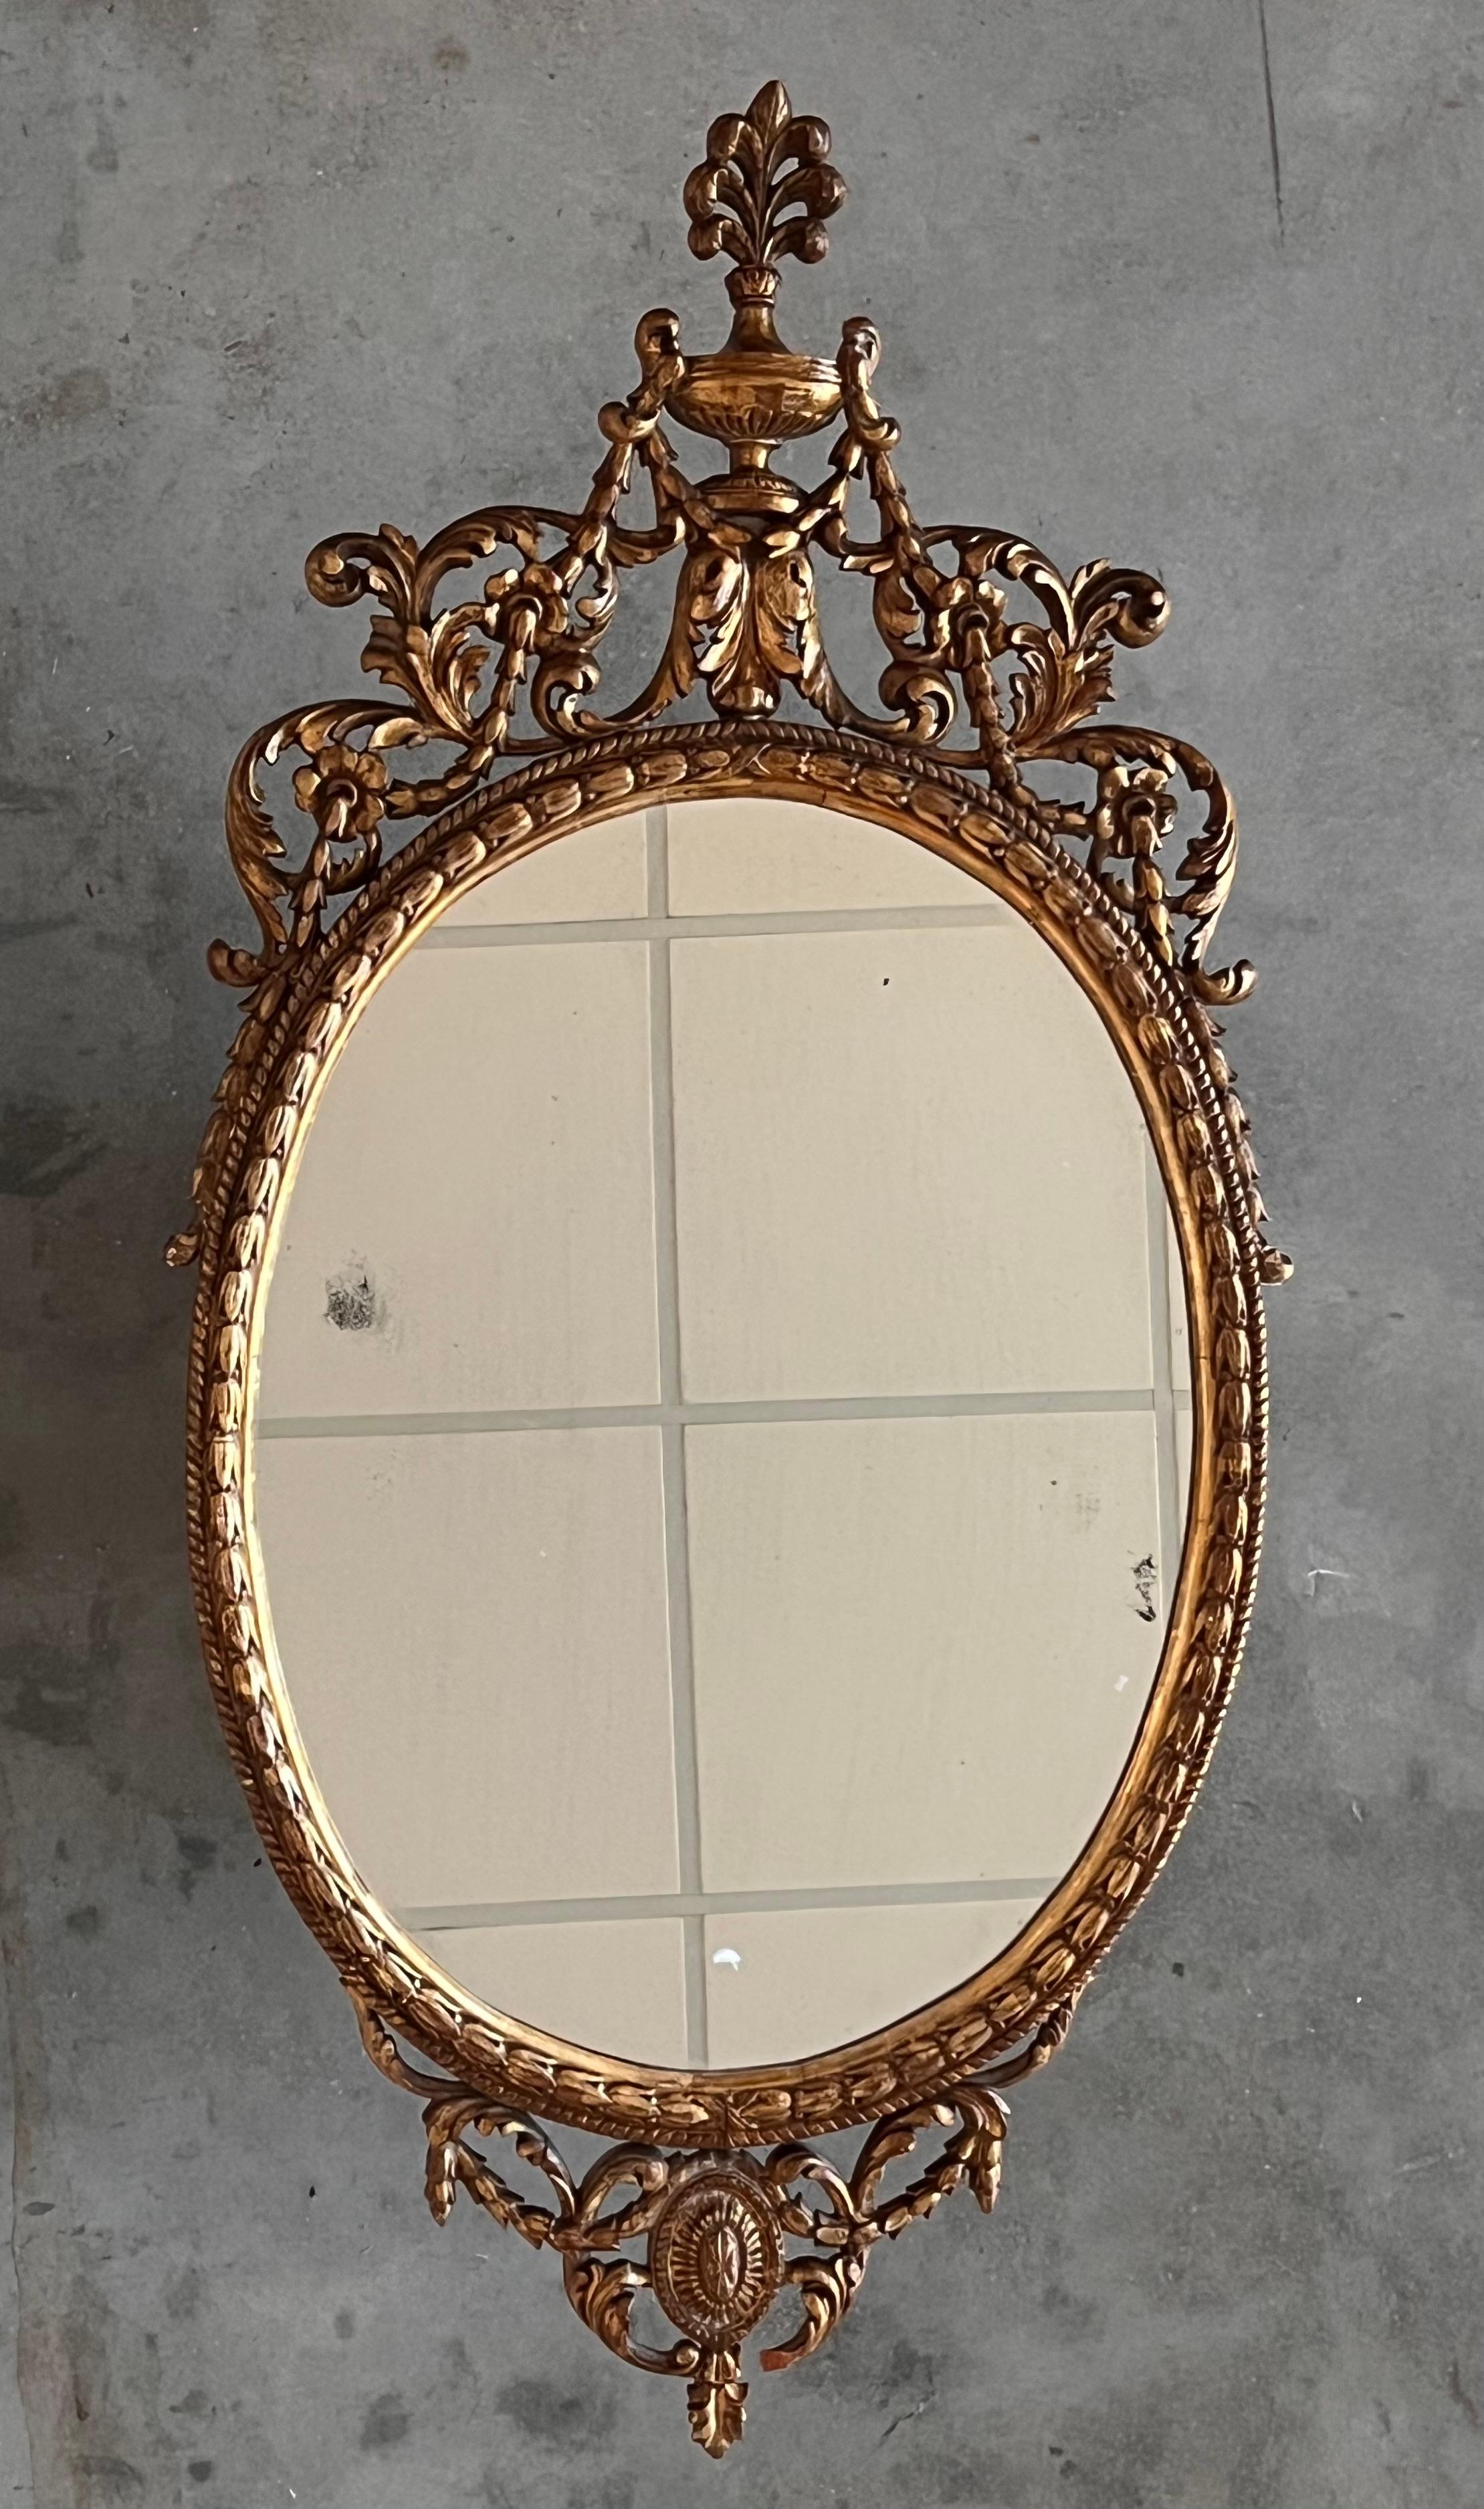 A superb 18th century oval gilt mirror with raised superstructure of a classical urn draped with tied husks, above foliate scrolls which continue down each side, ending in further tied tails of husks. Resting on a faux mantle with draped foliage and